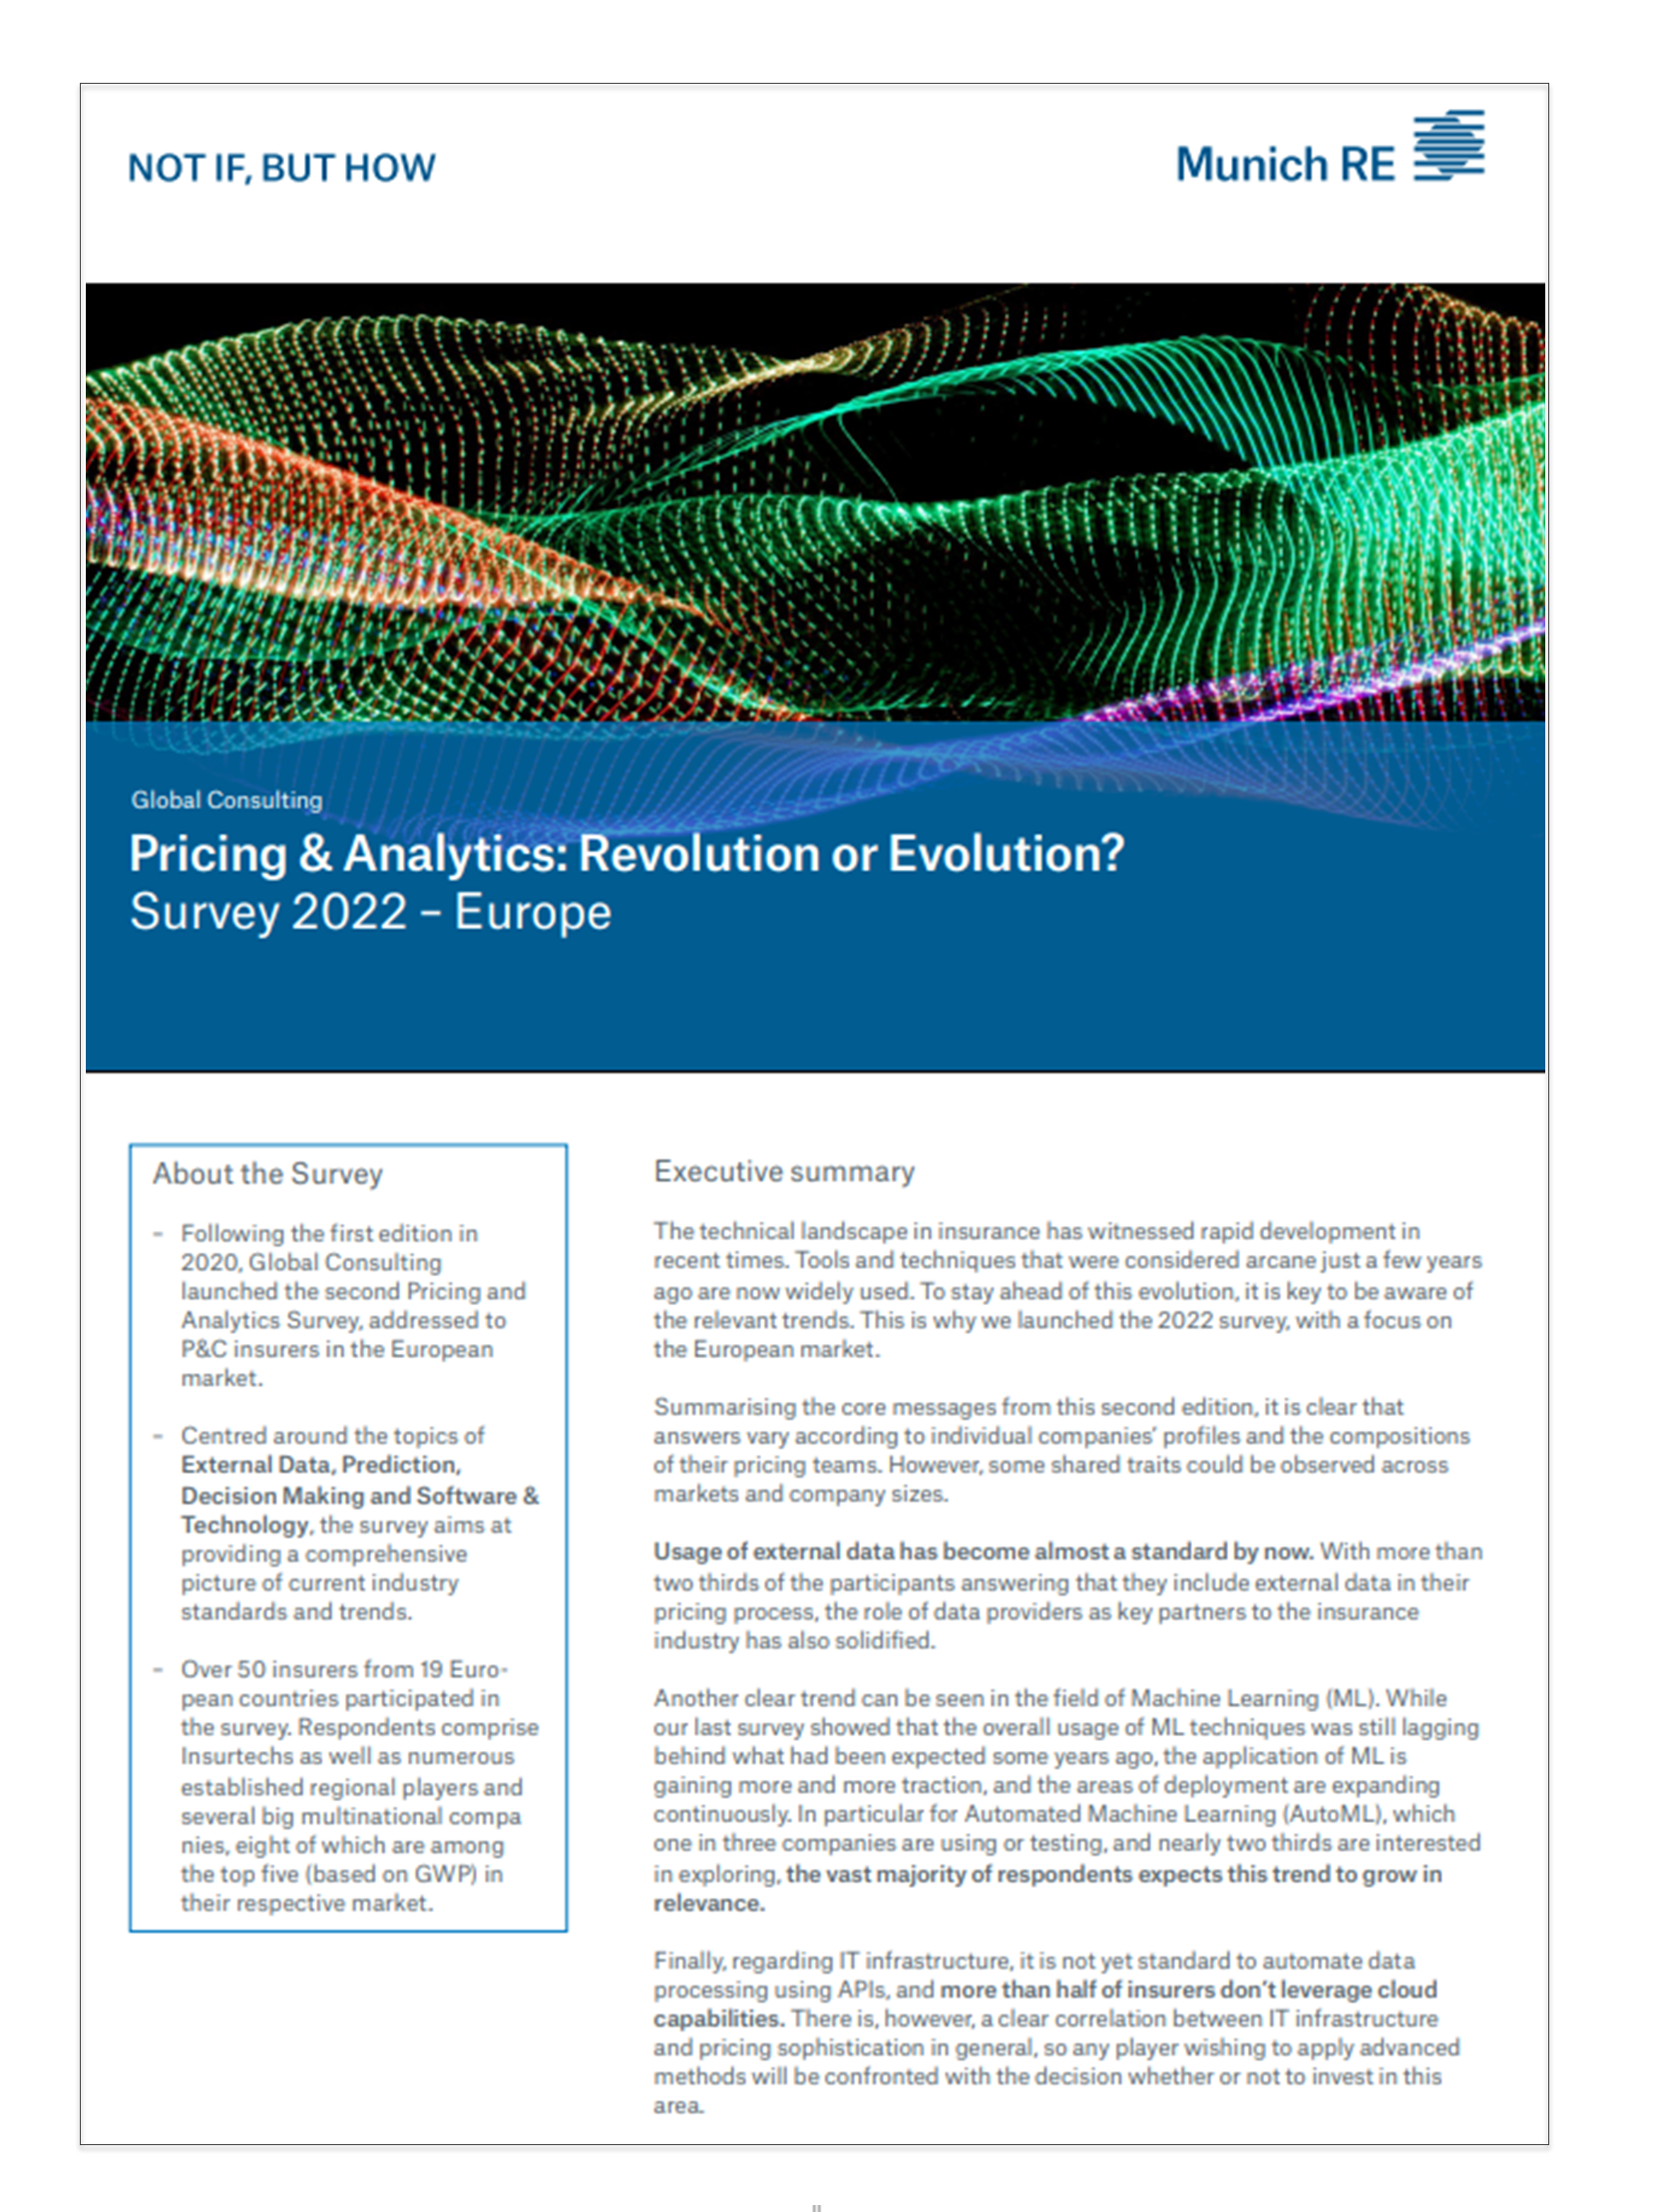 Whitepaper: The next generation of pricing actuaries